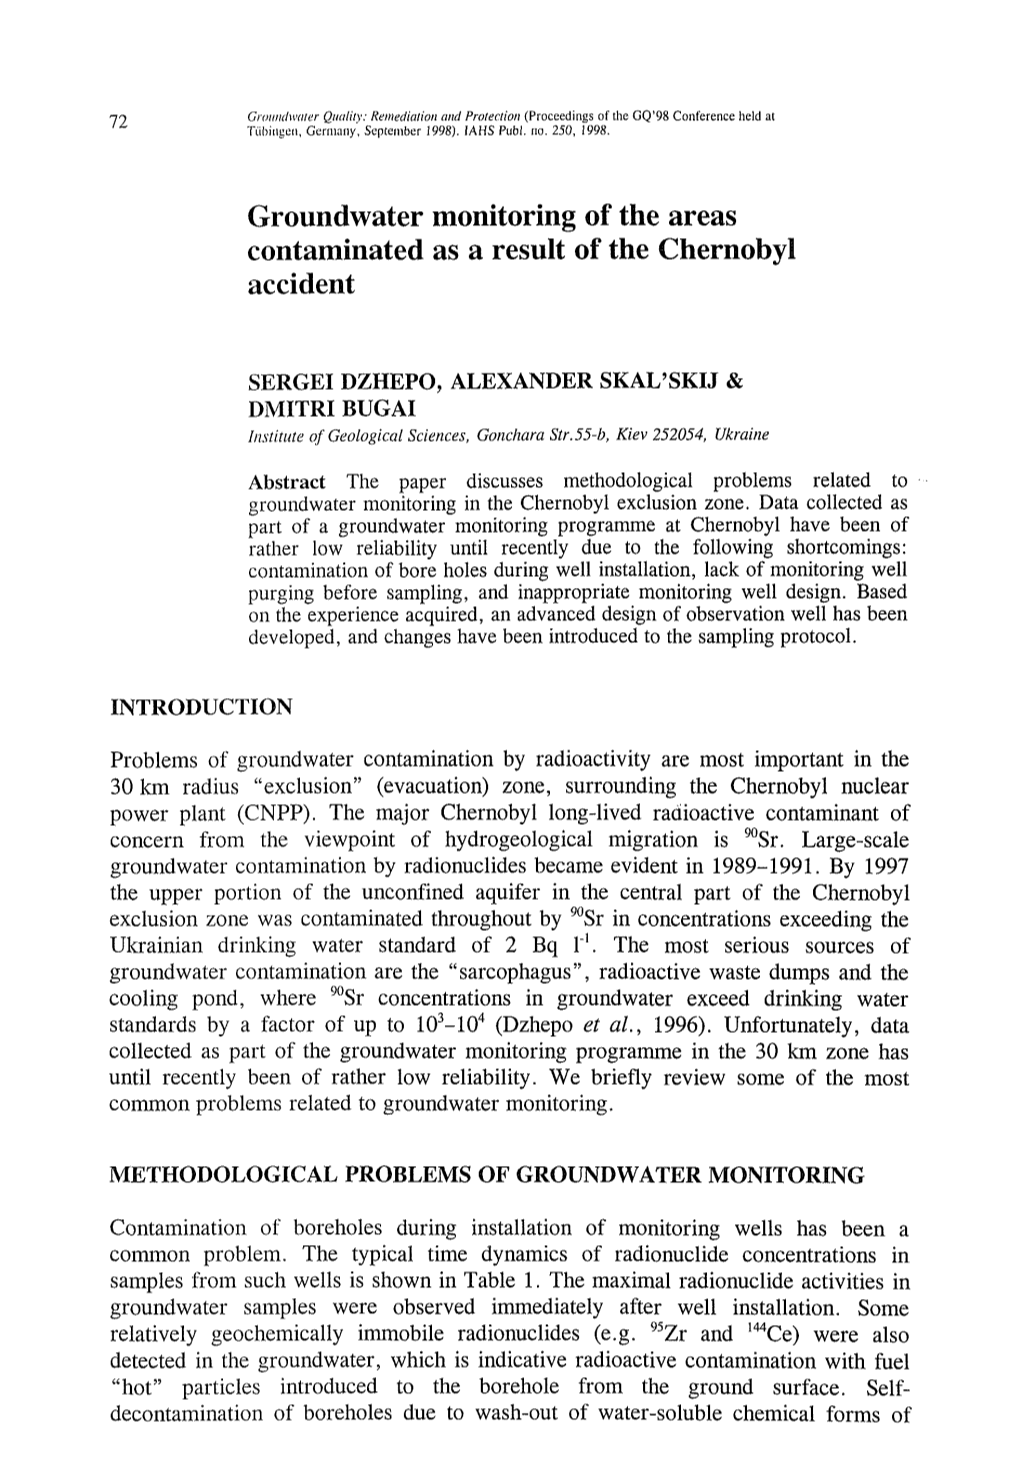 Groundwater Monitoring of the Areas Contaminated As a Result of the Chernobyl Accident